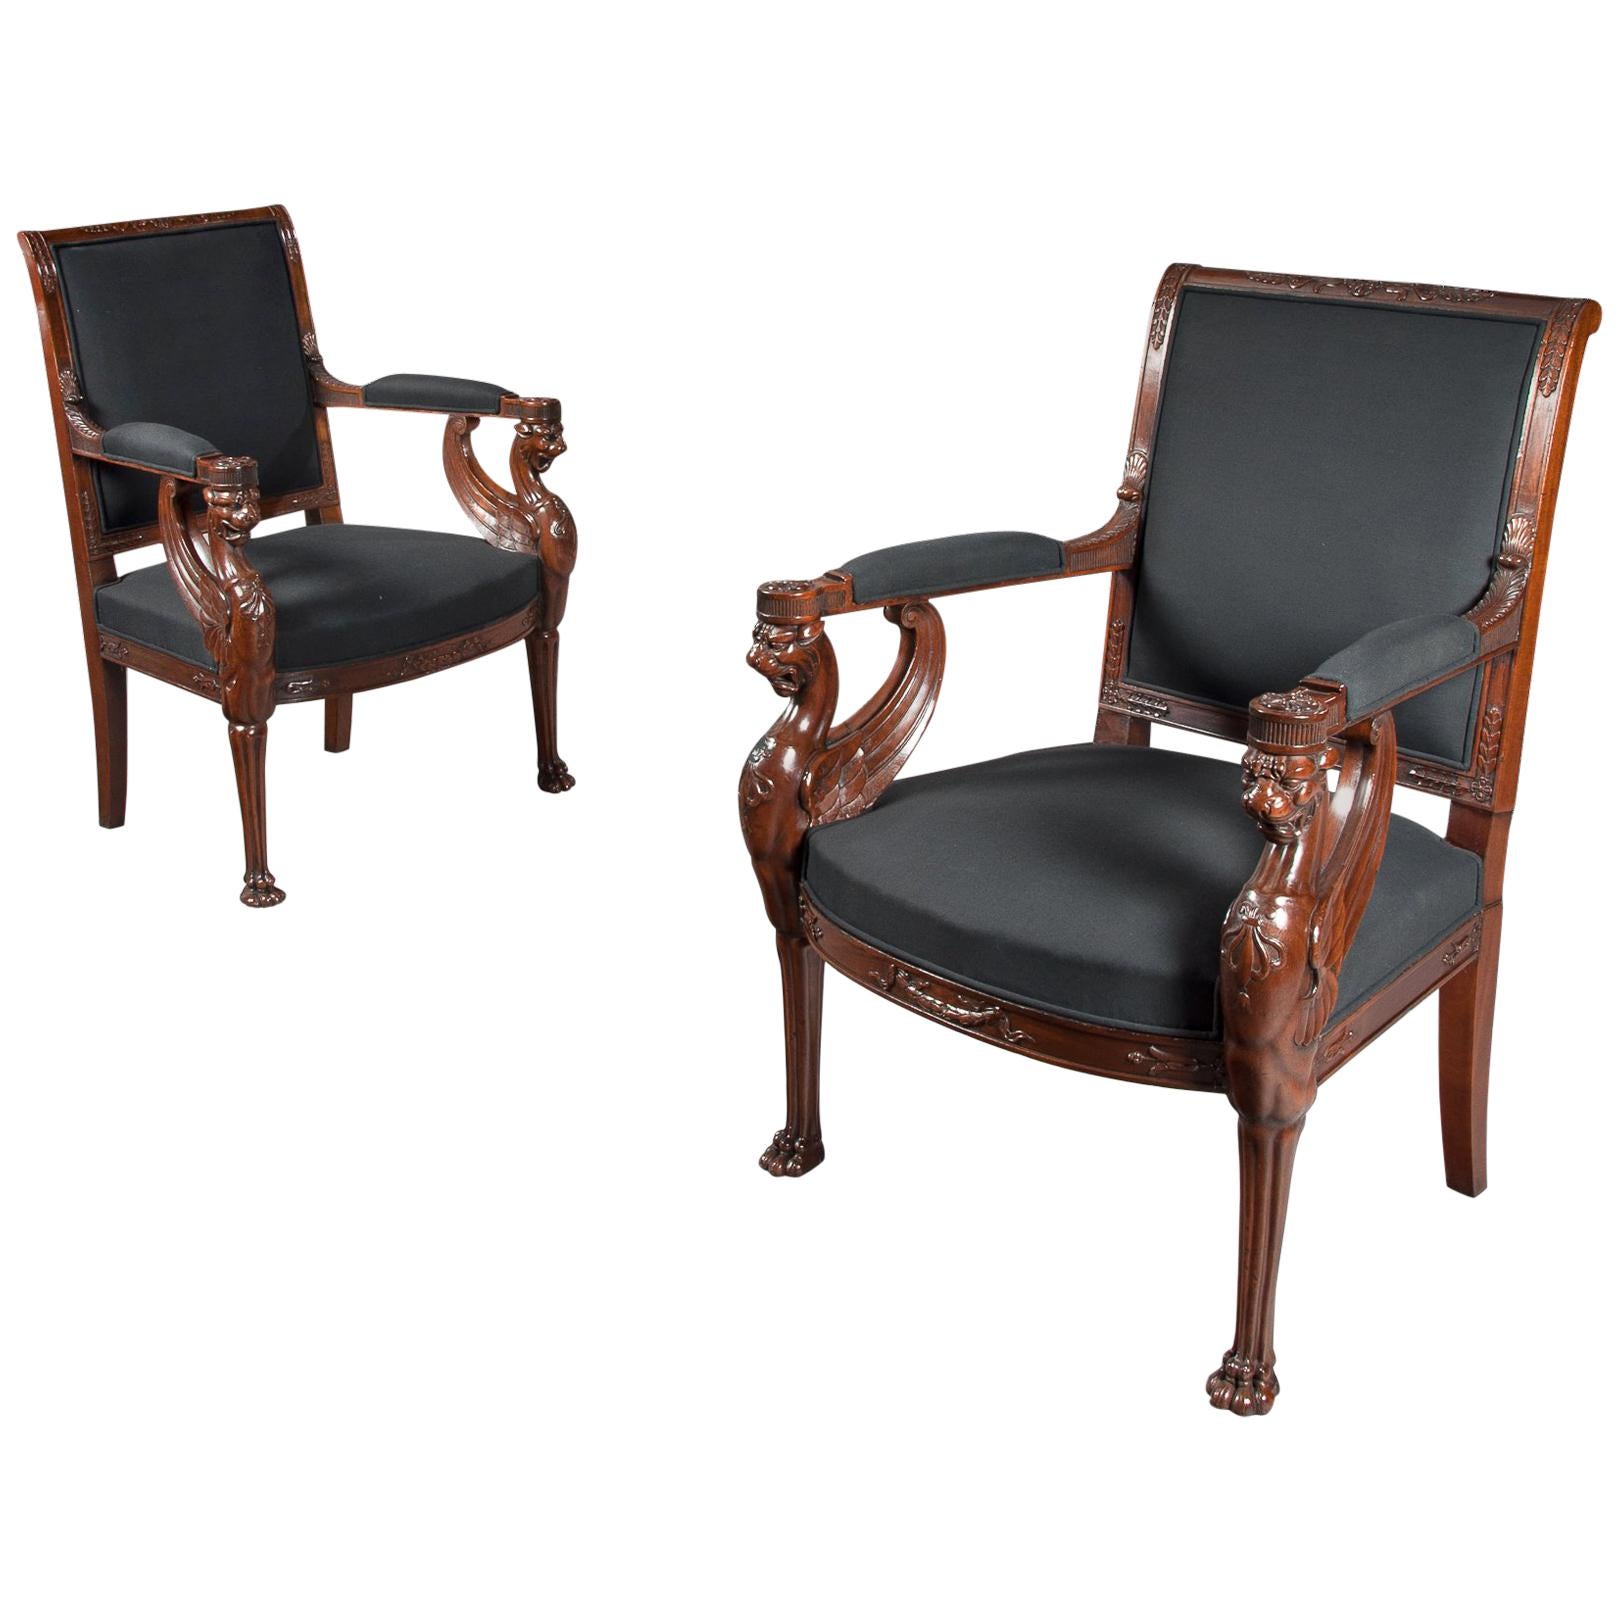 Pair of Empire Period Mahogany Fauteuils, Armchairs